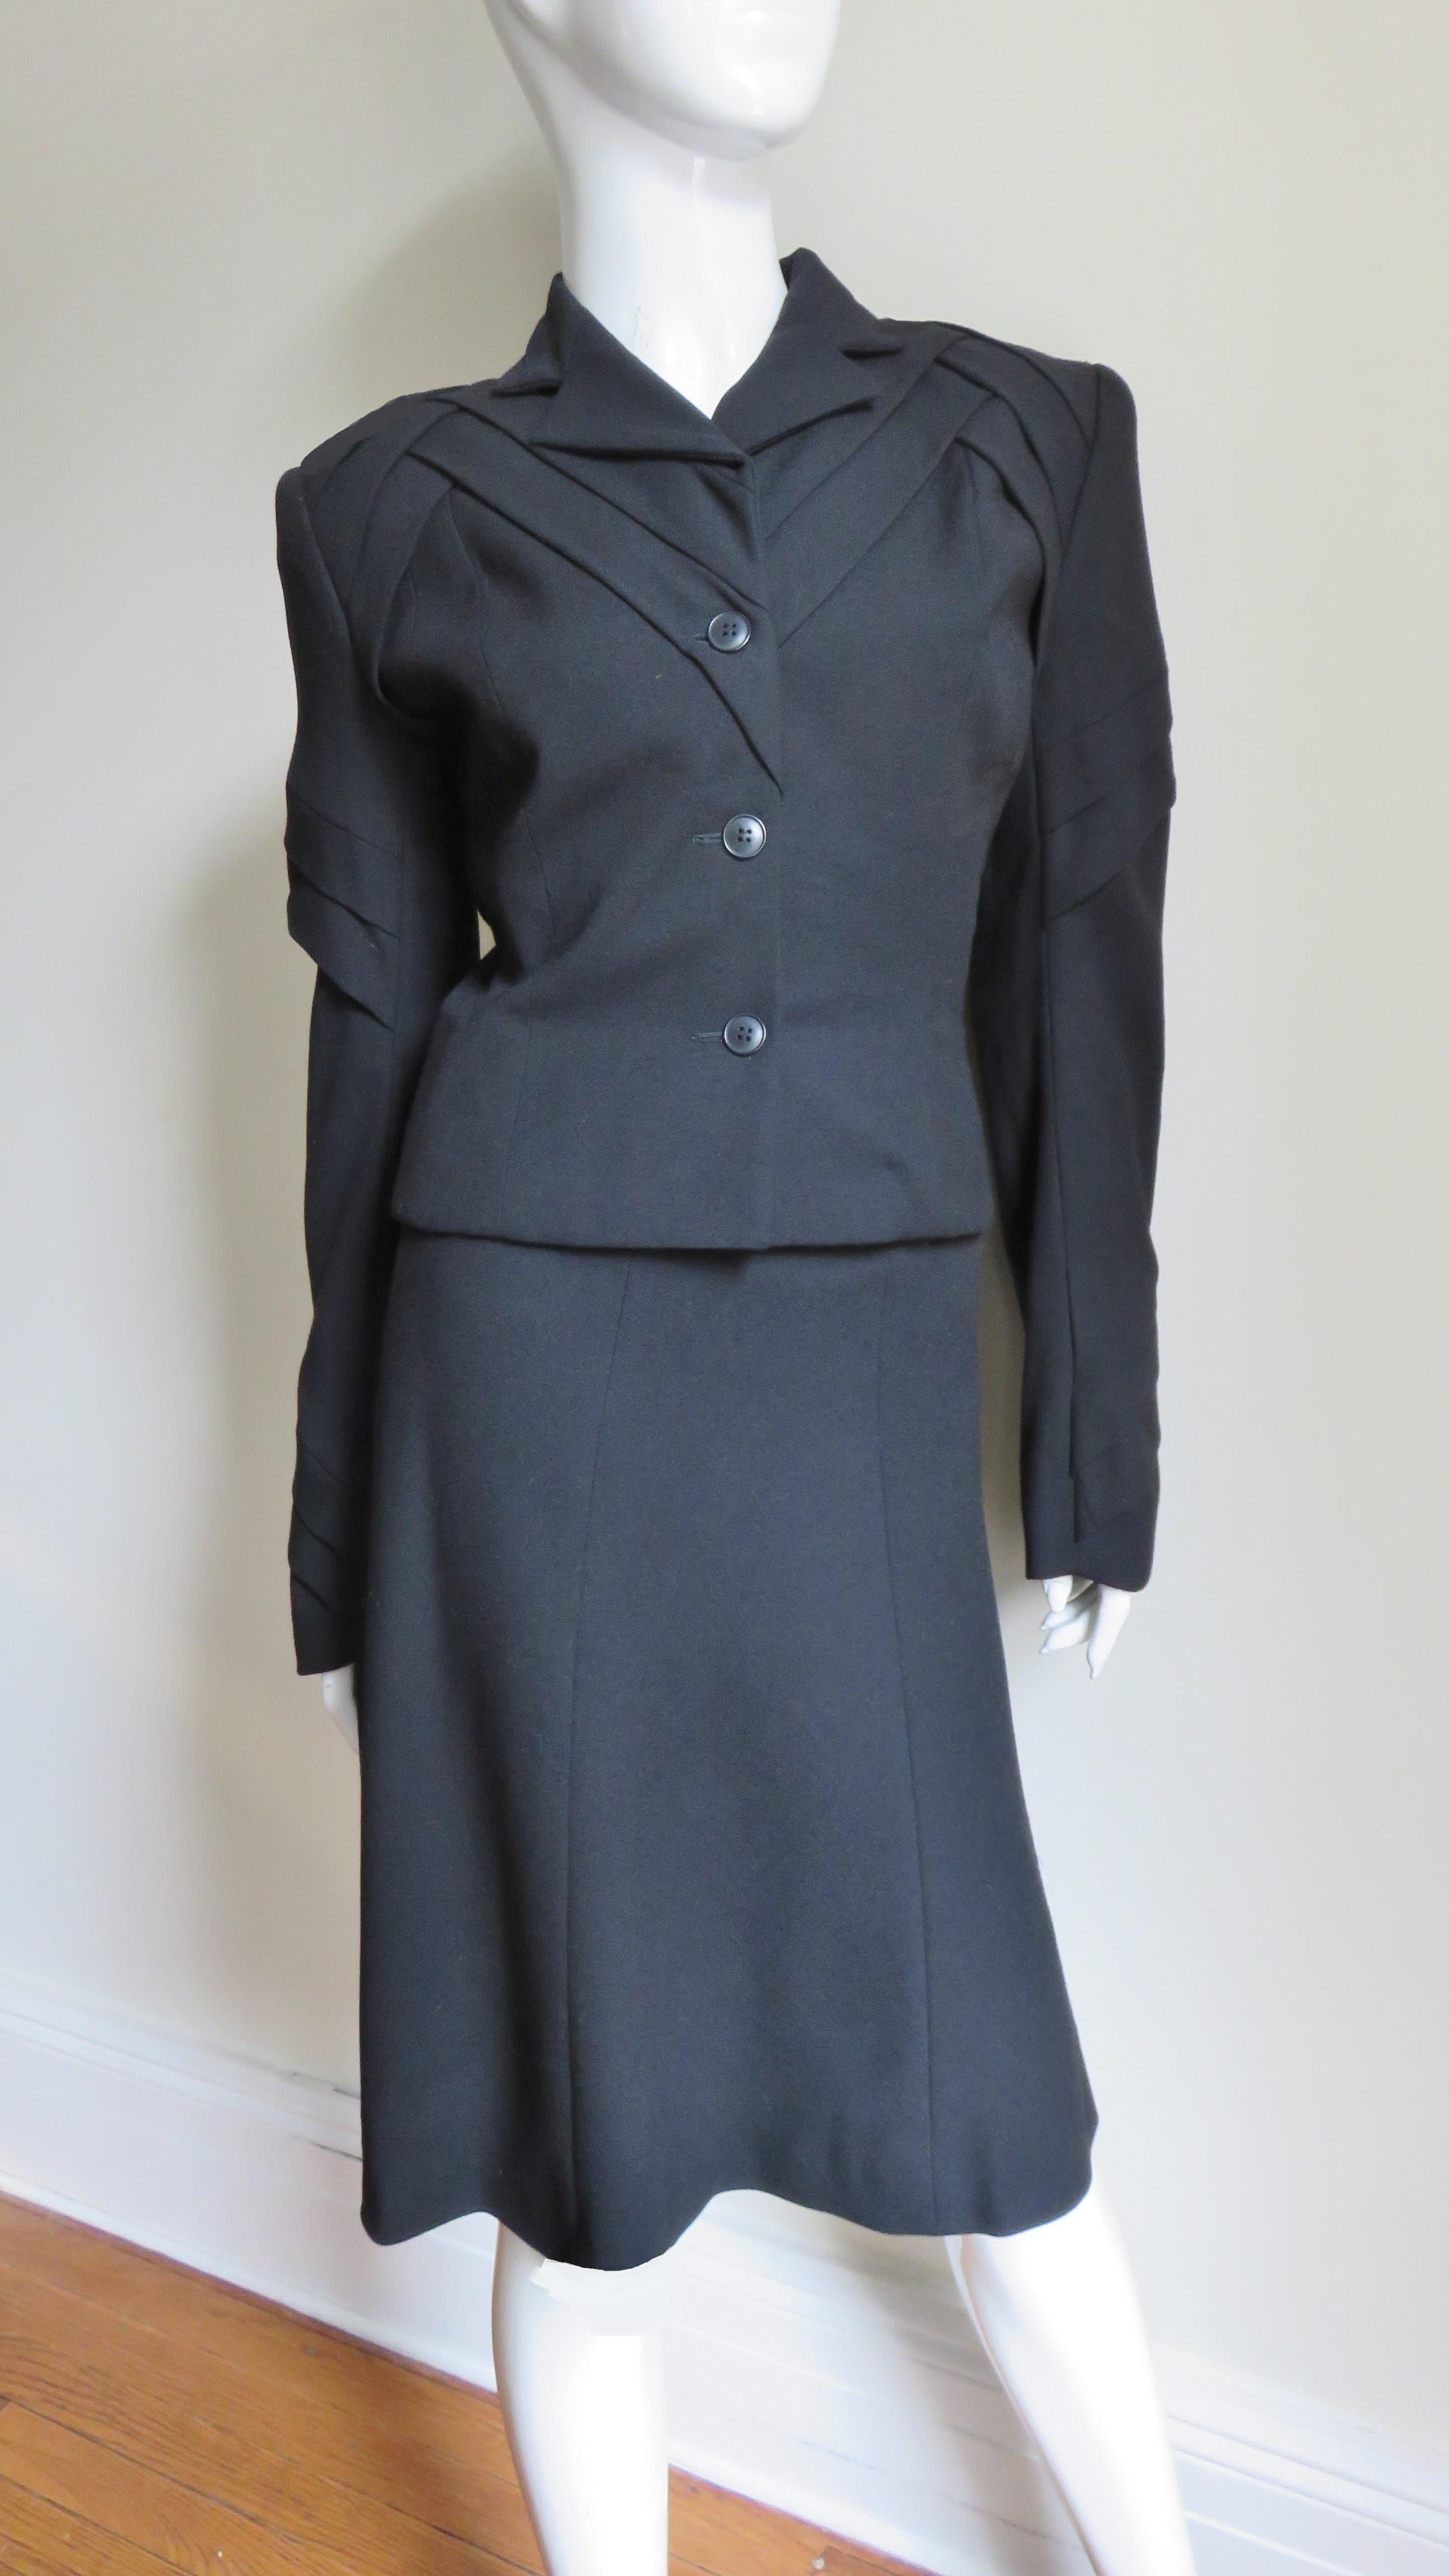 A gorgeous black wool suit with a twist by John Galliano.  It consist of a hip length single breasted jacket with small lapels and beautiful detail at the upper jacket including the sleeves creating fabulous angles and lines.  The matching 6 panel